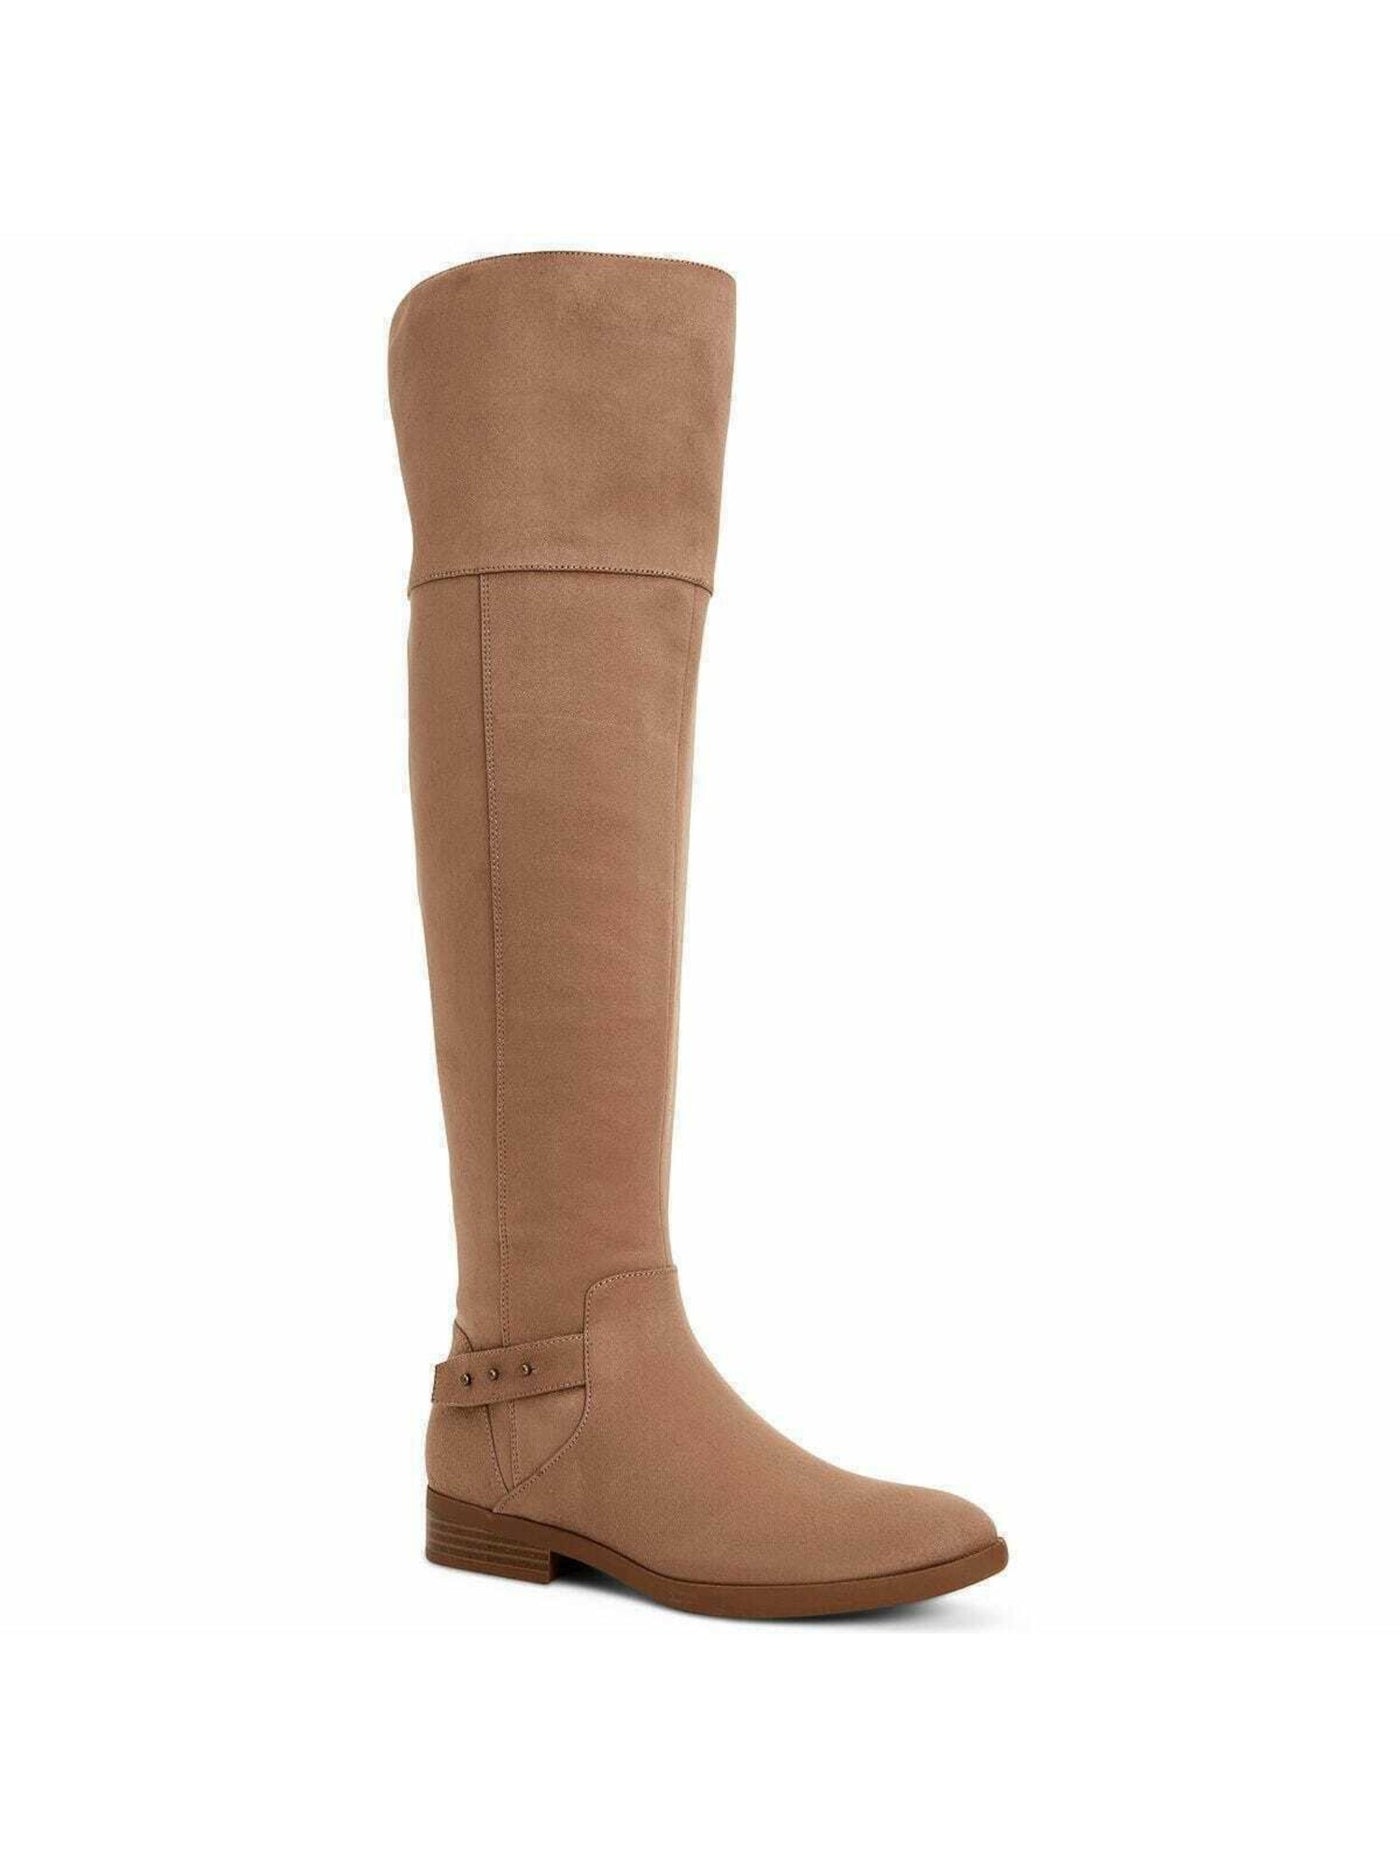 STYLE & COMPANY Womens Beige Round Toe Stacked Heel Zip-Up Dress Boots Shoes 8